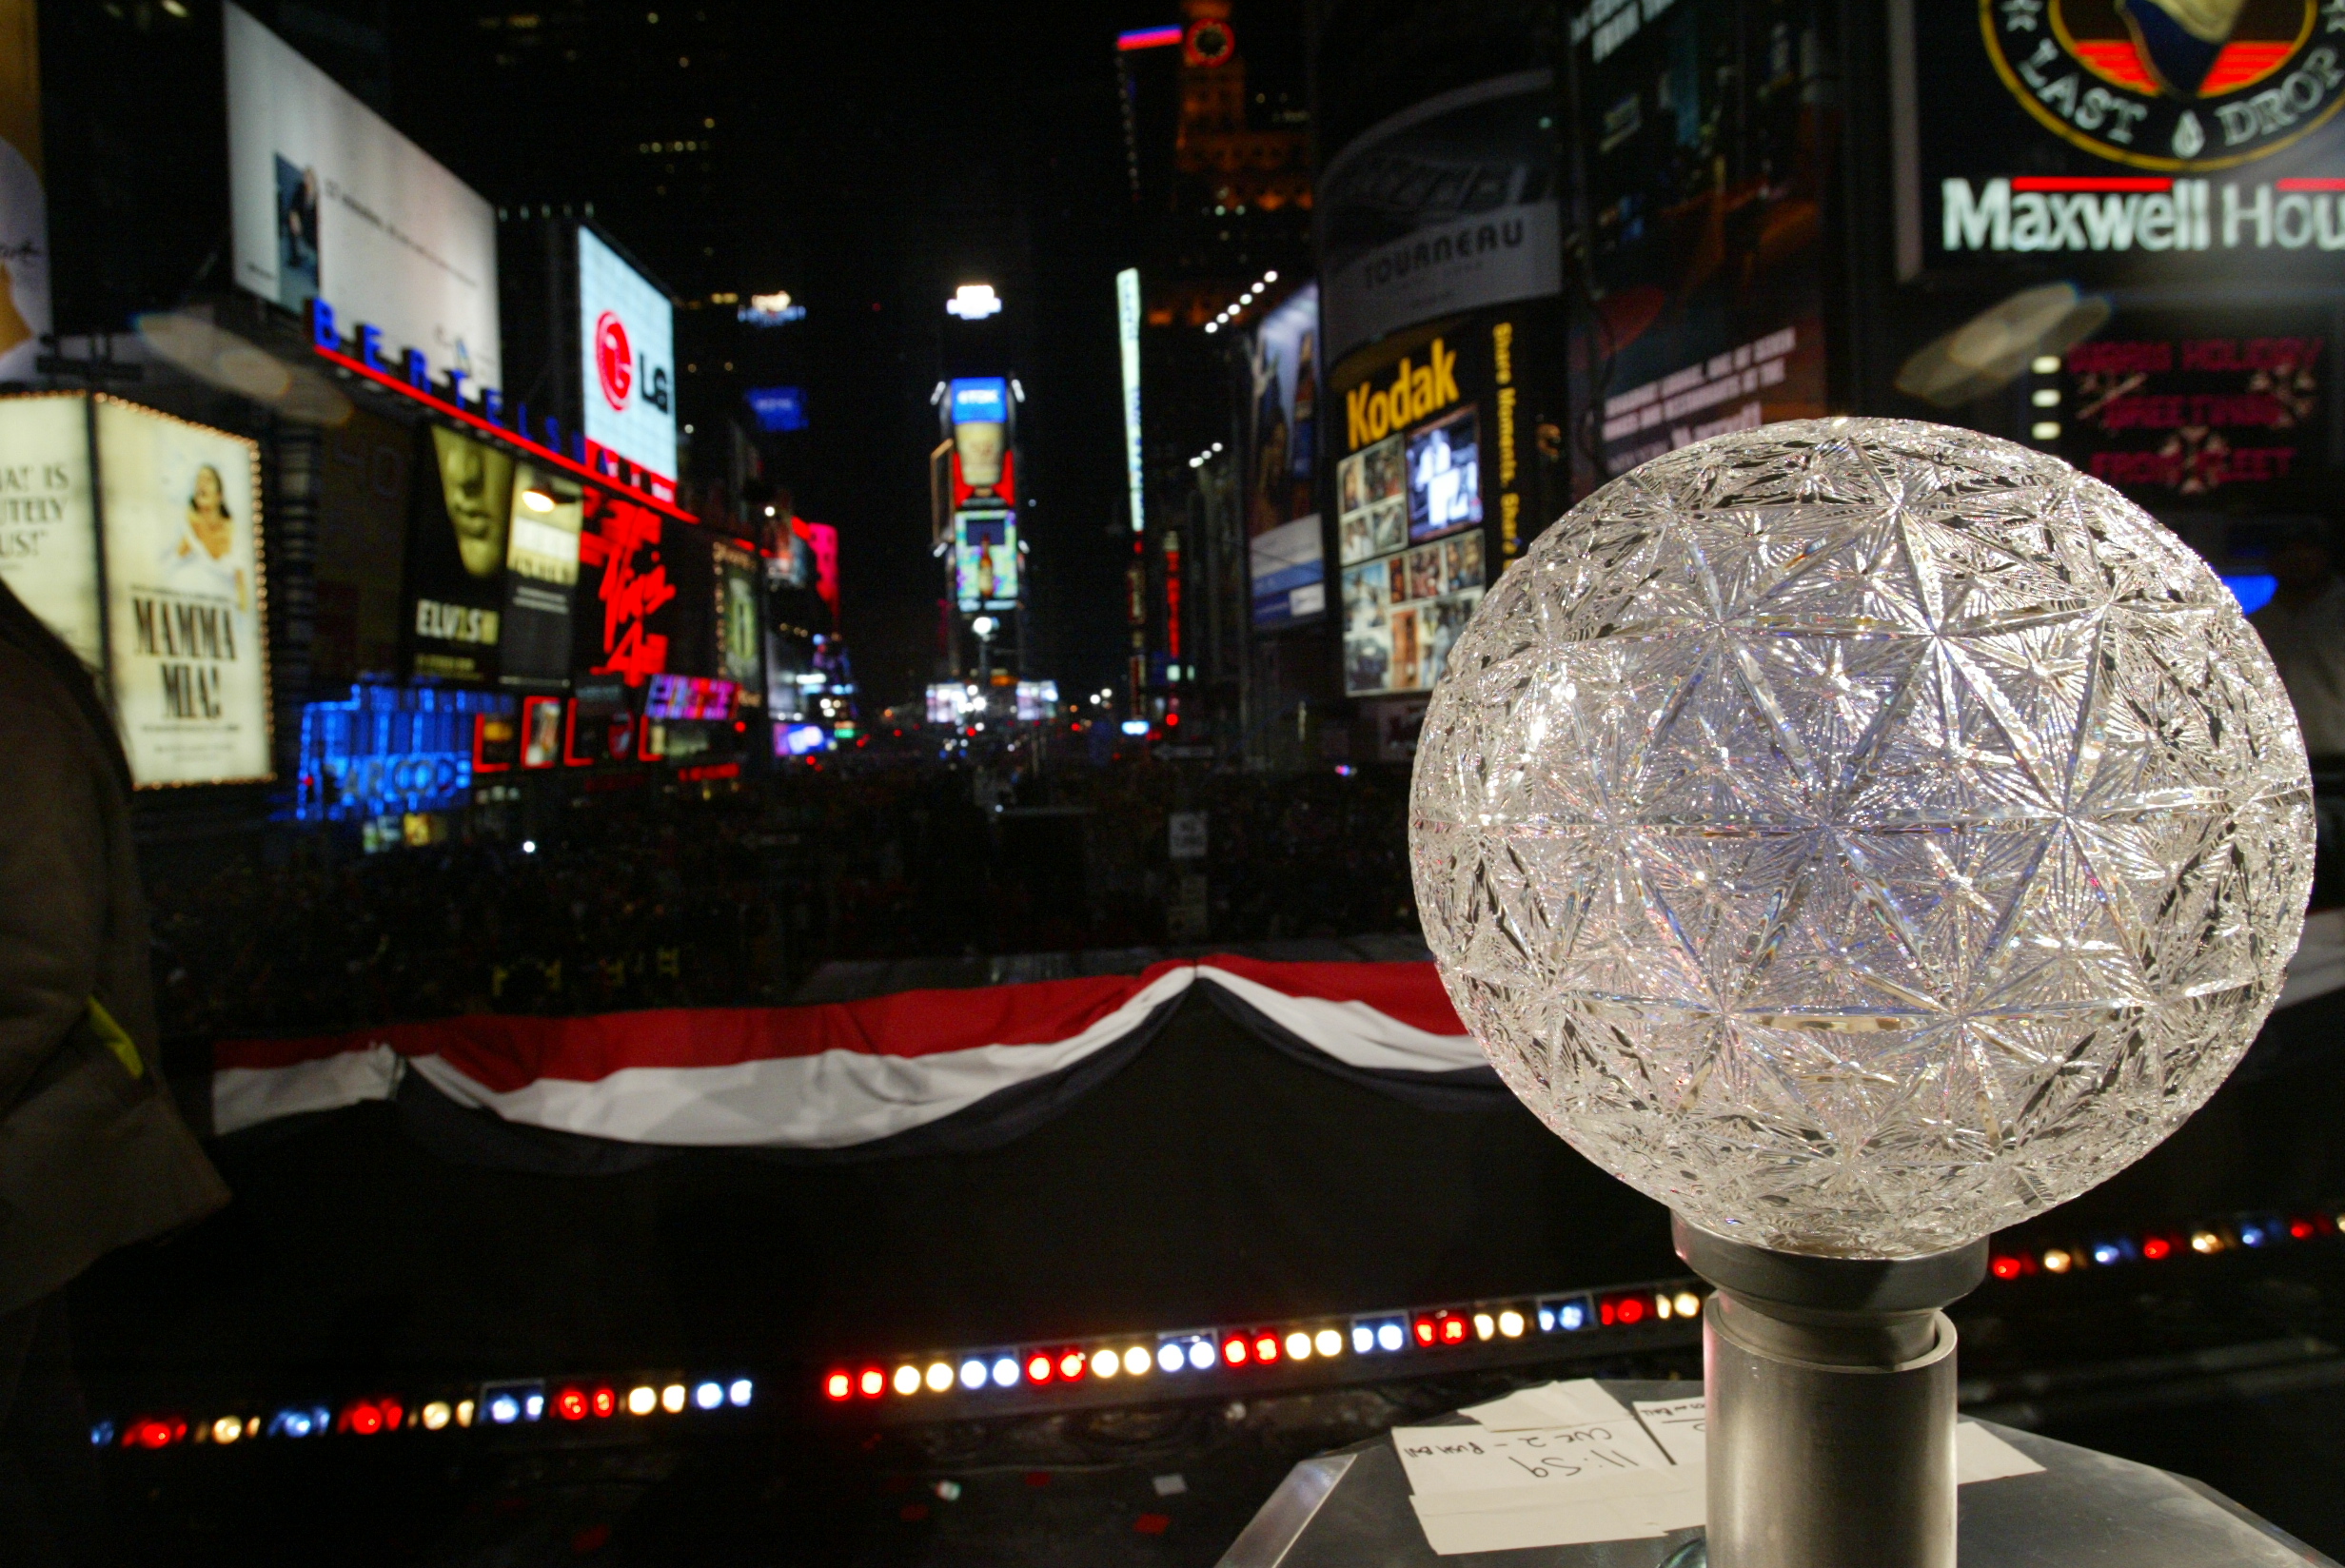 The Crystal Ball Controller, Times Square